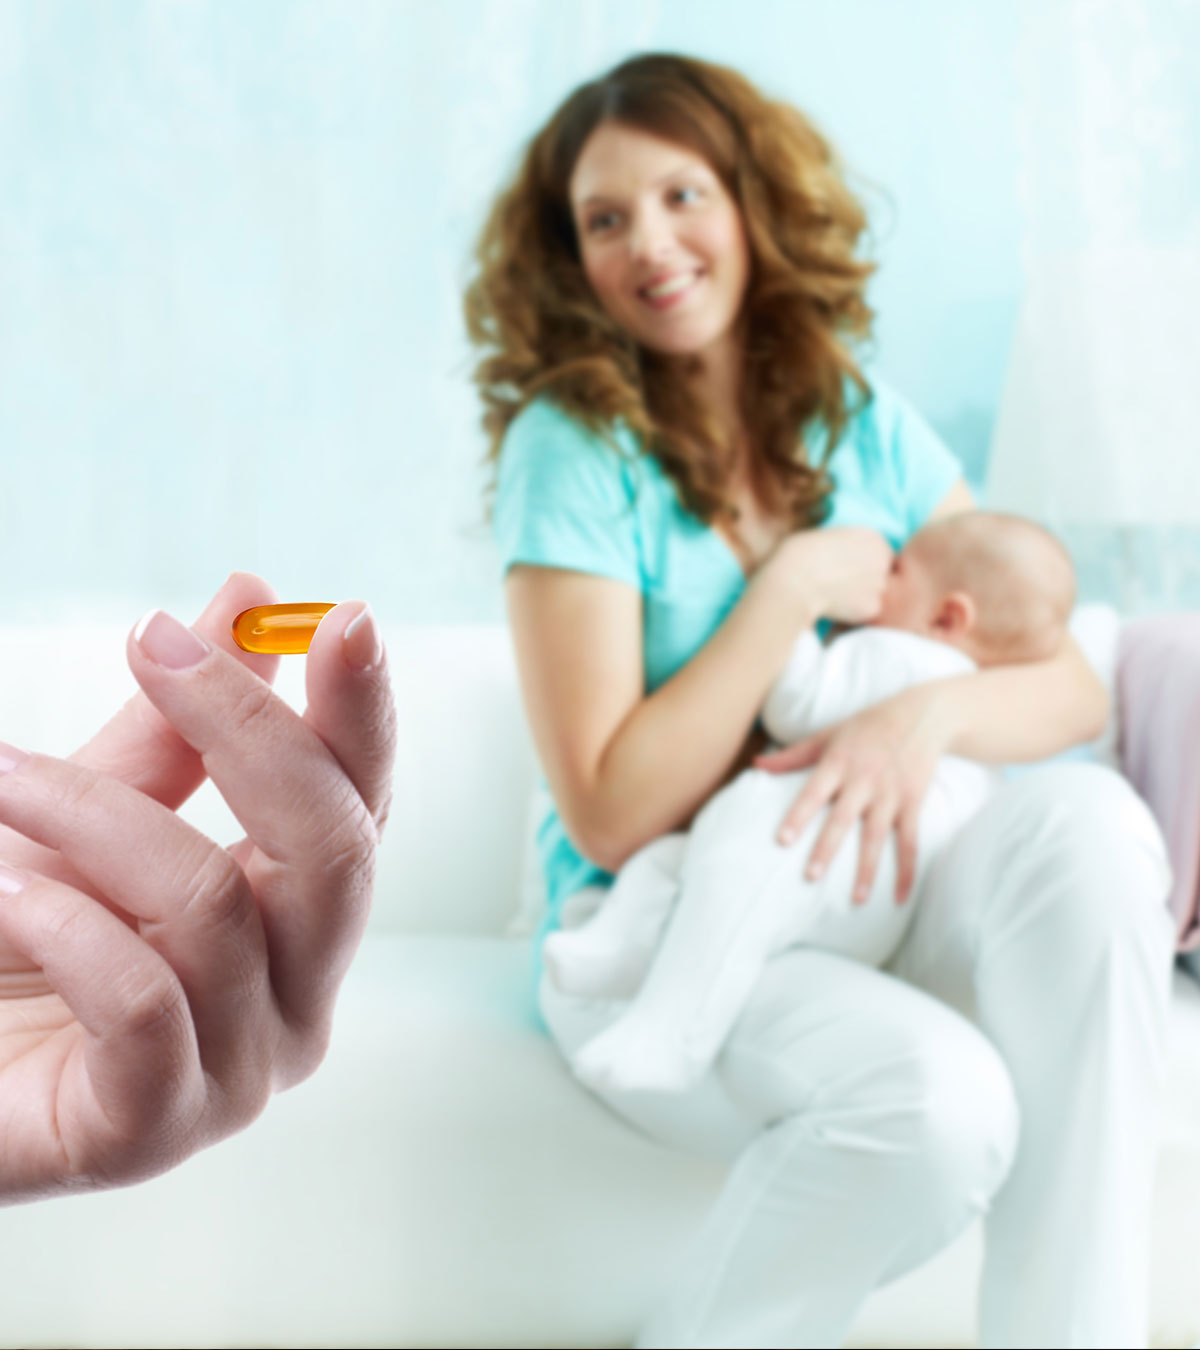 Is It Safe To Consume Fish Oil During Breastfeeding?